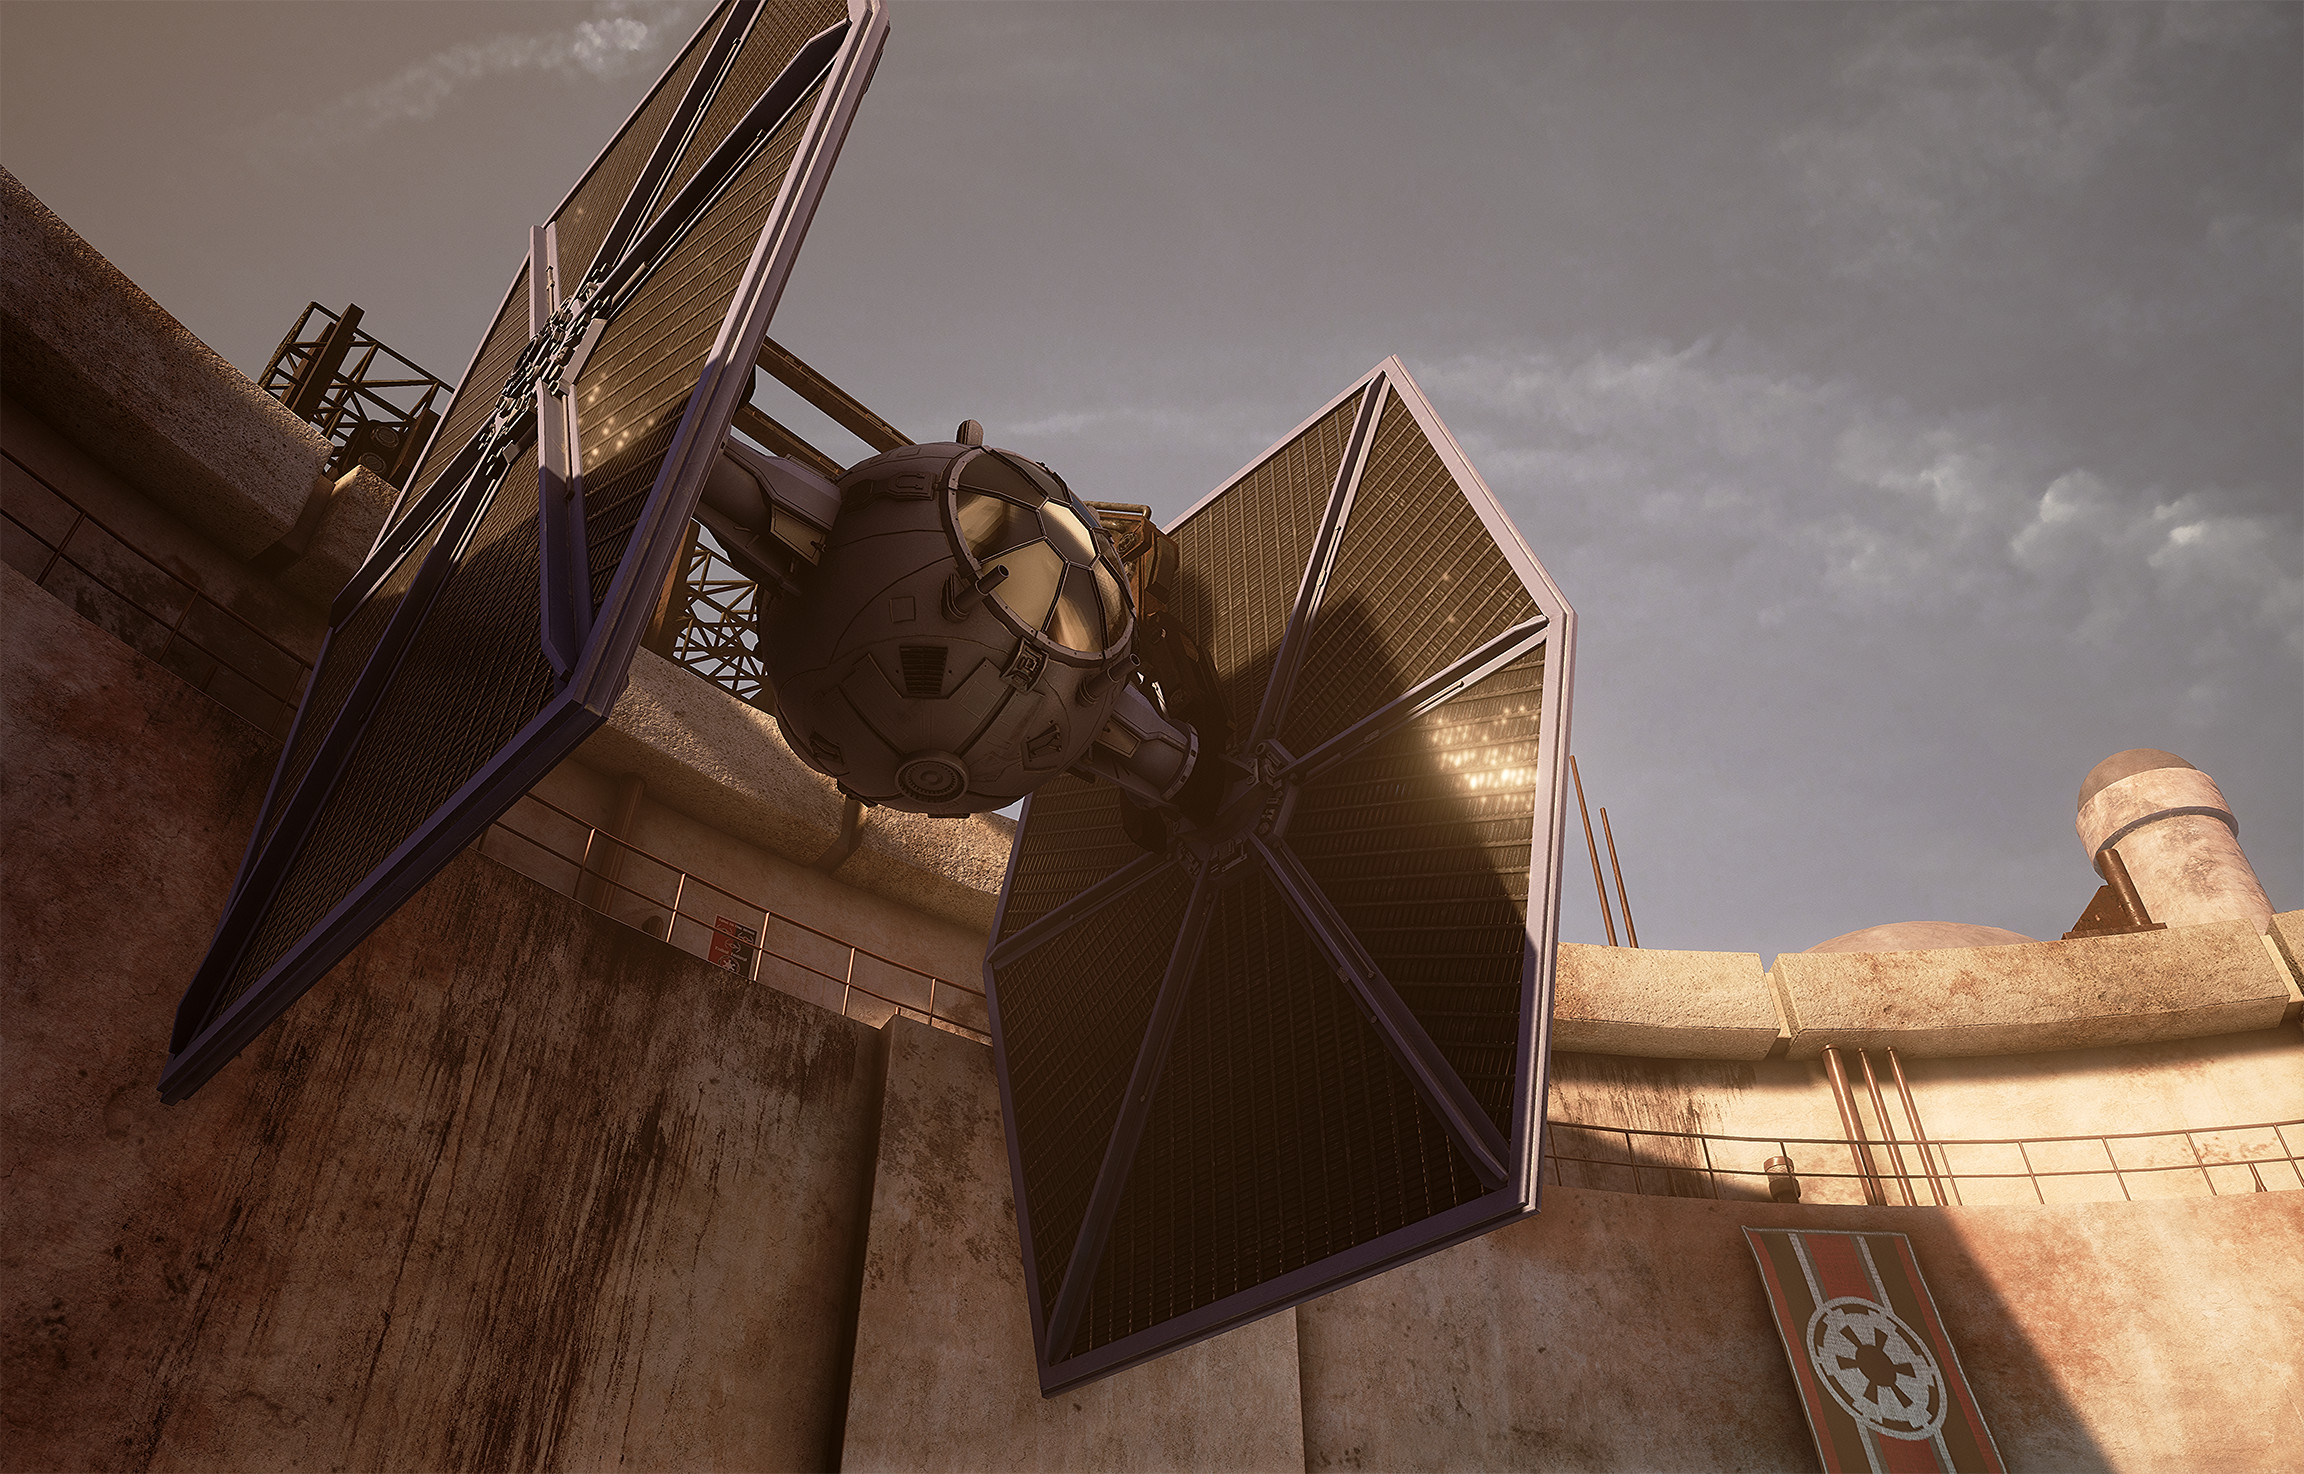 Tie Fighter: model, textures, shader
Tie Clamp: textures, shader